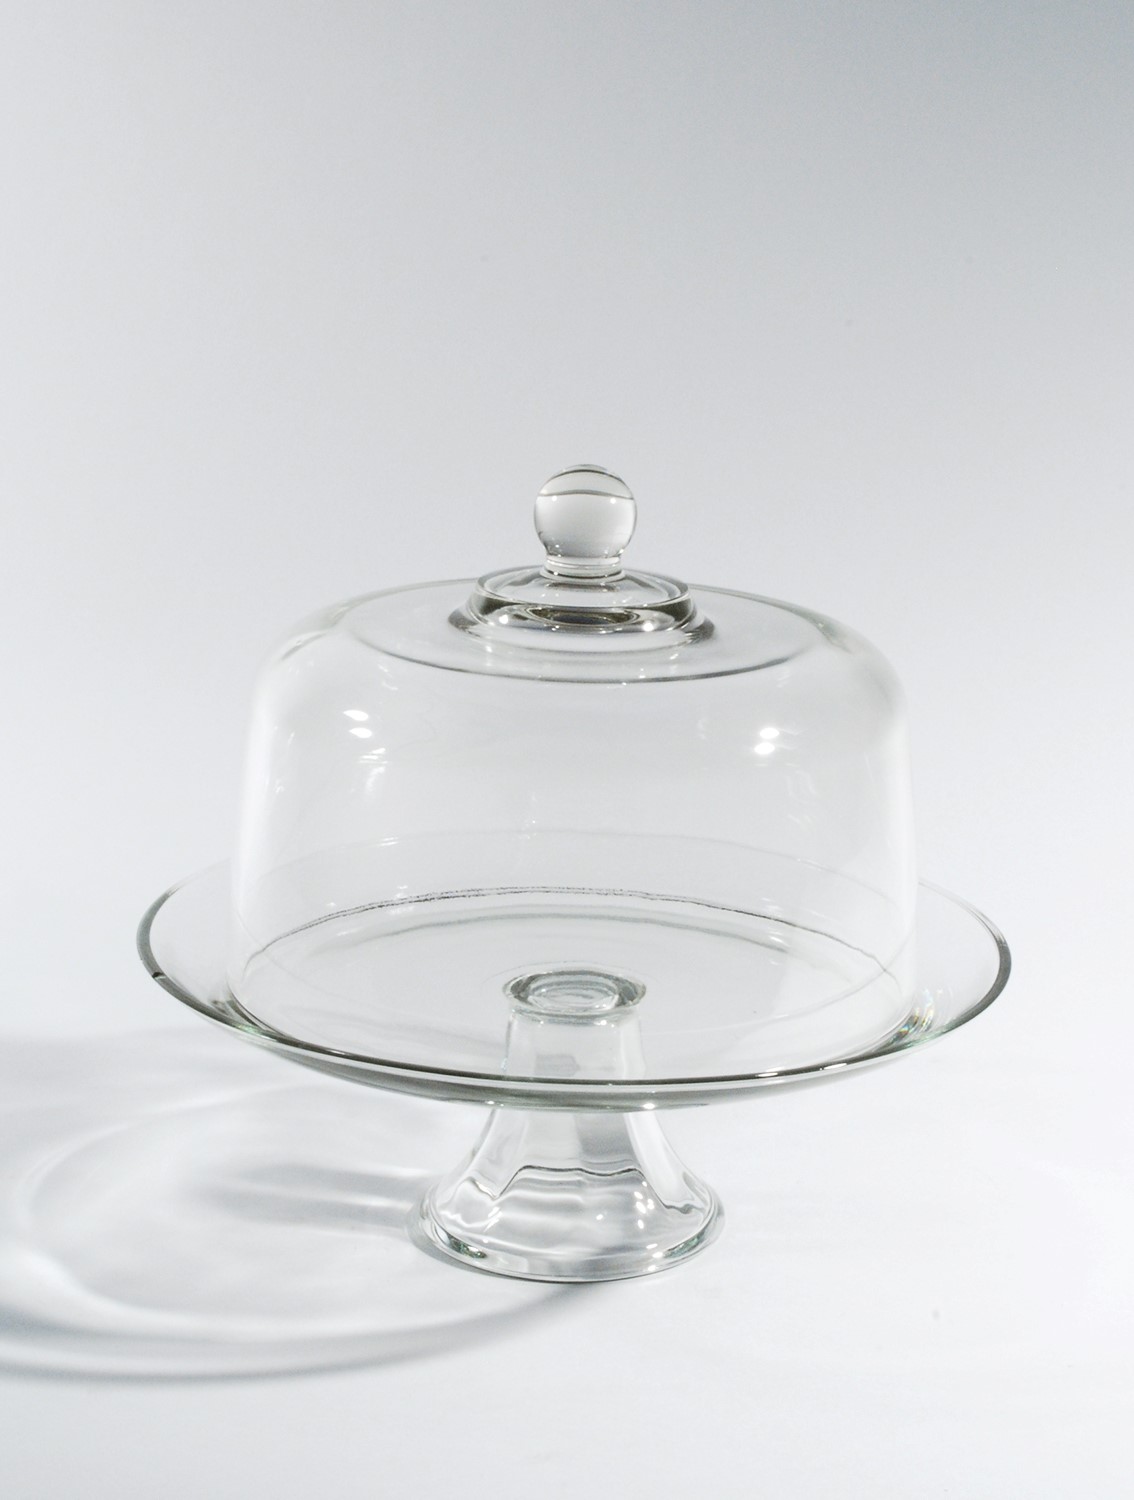 pioneer woman cake plate with dome cover